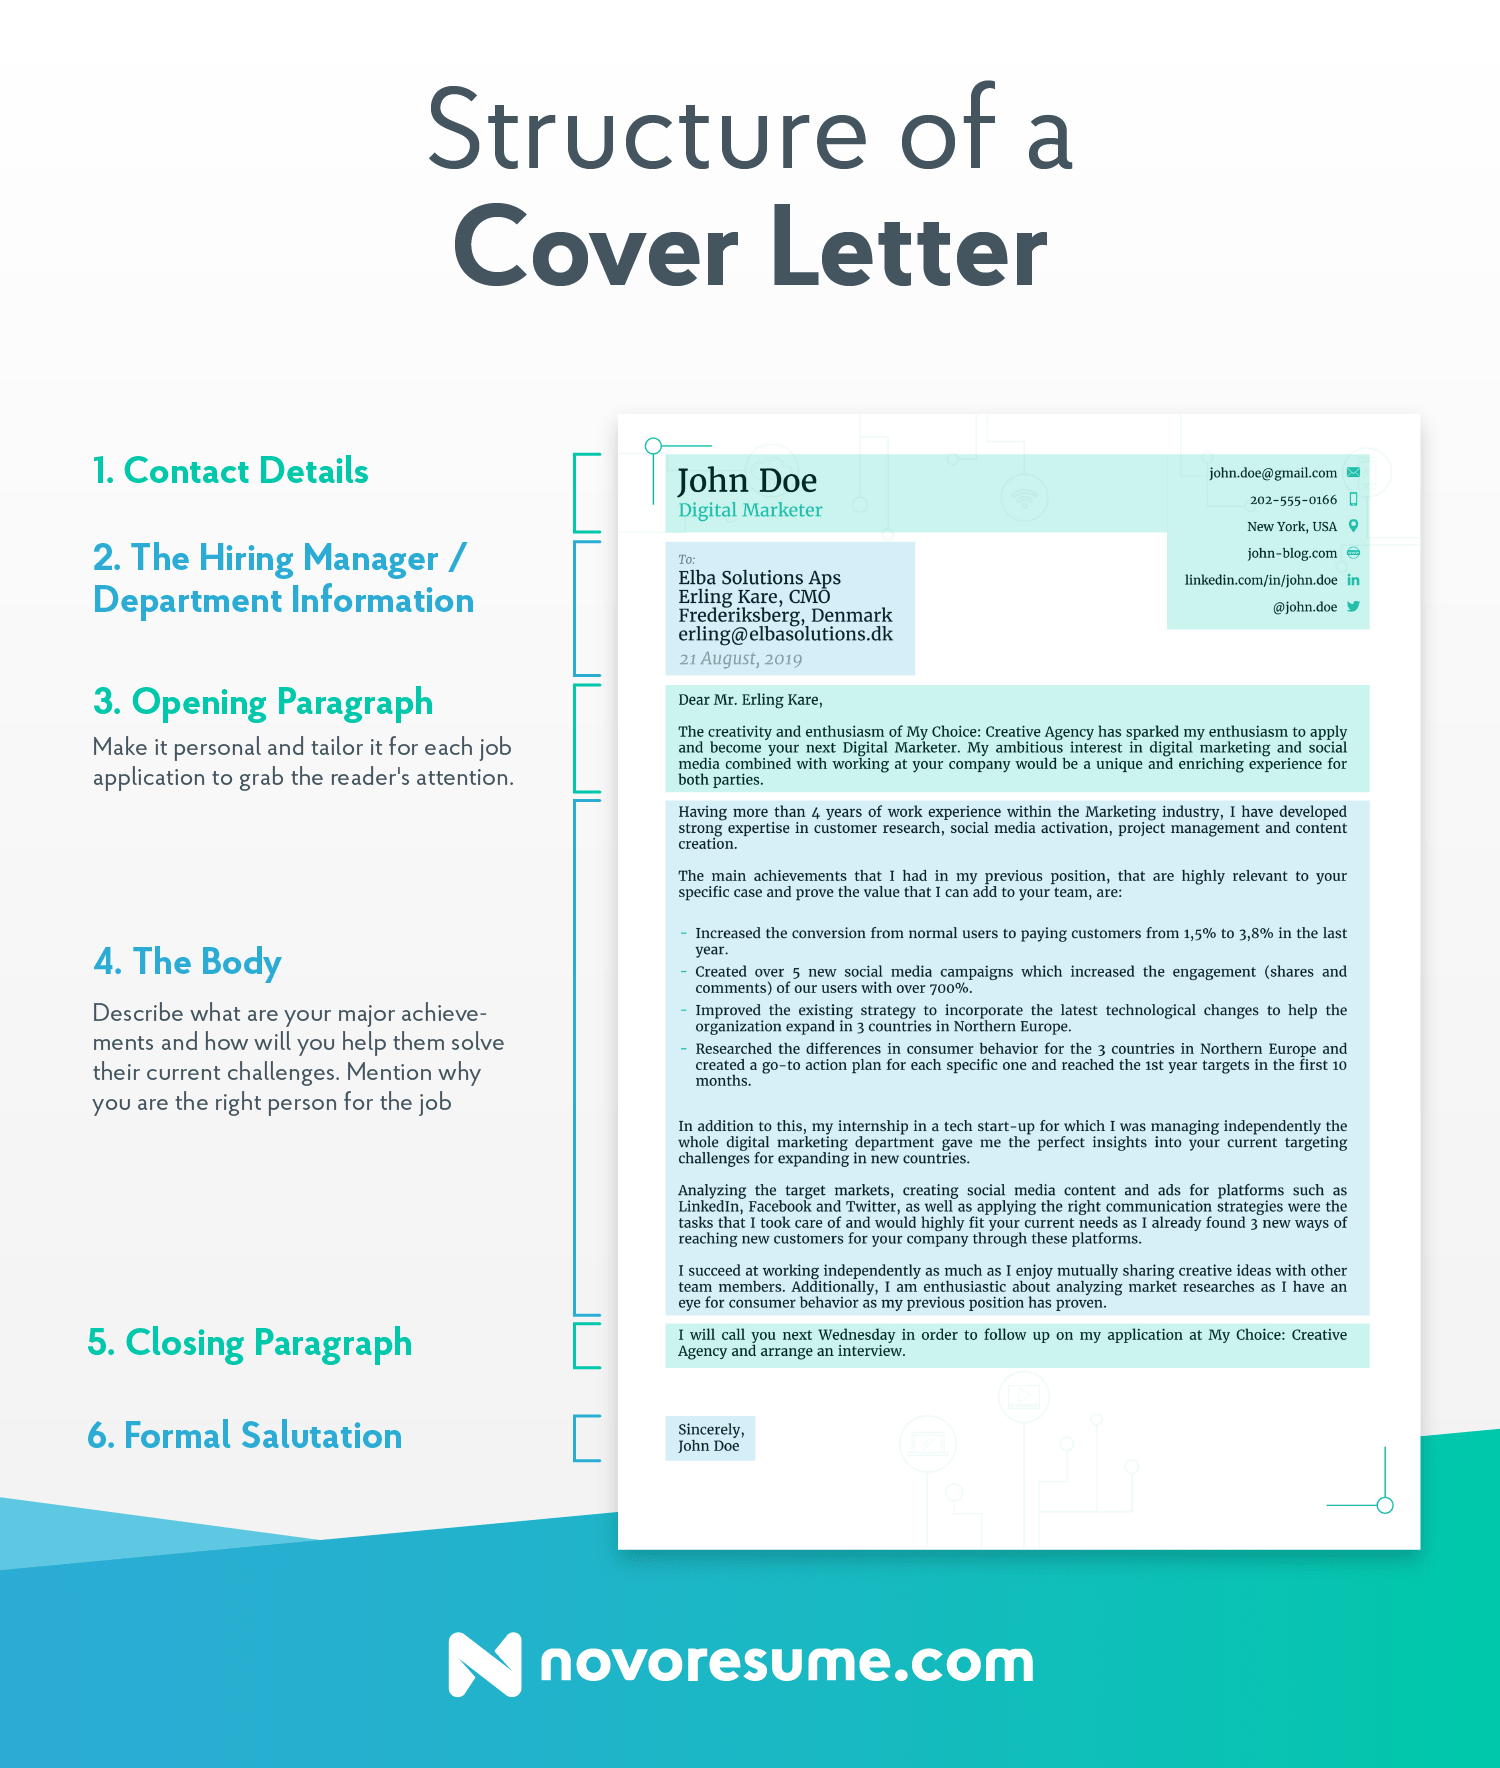 cover letter structure it specialist